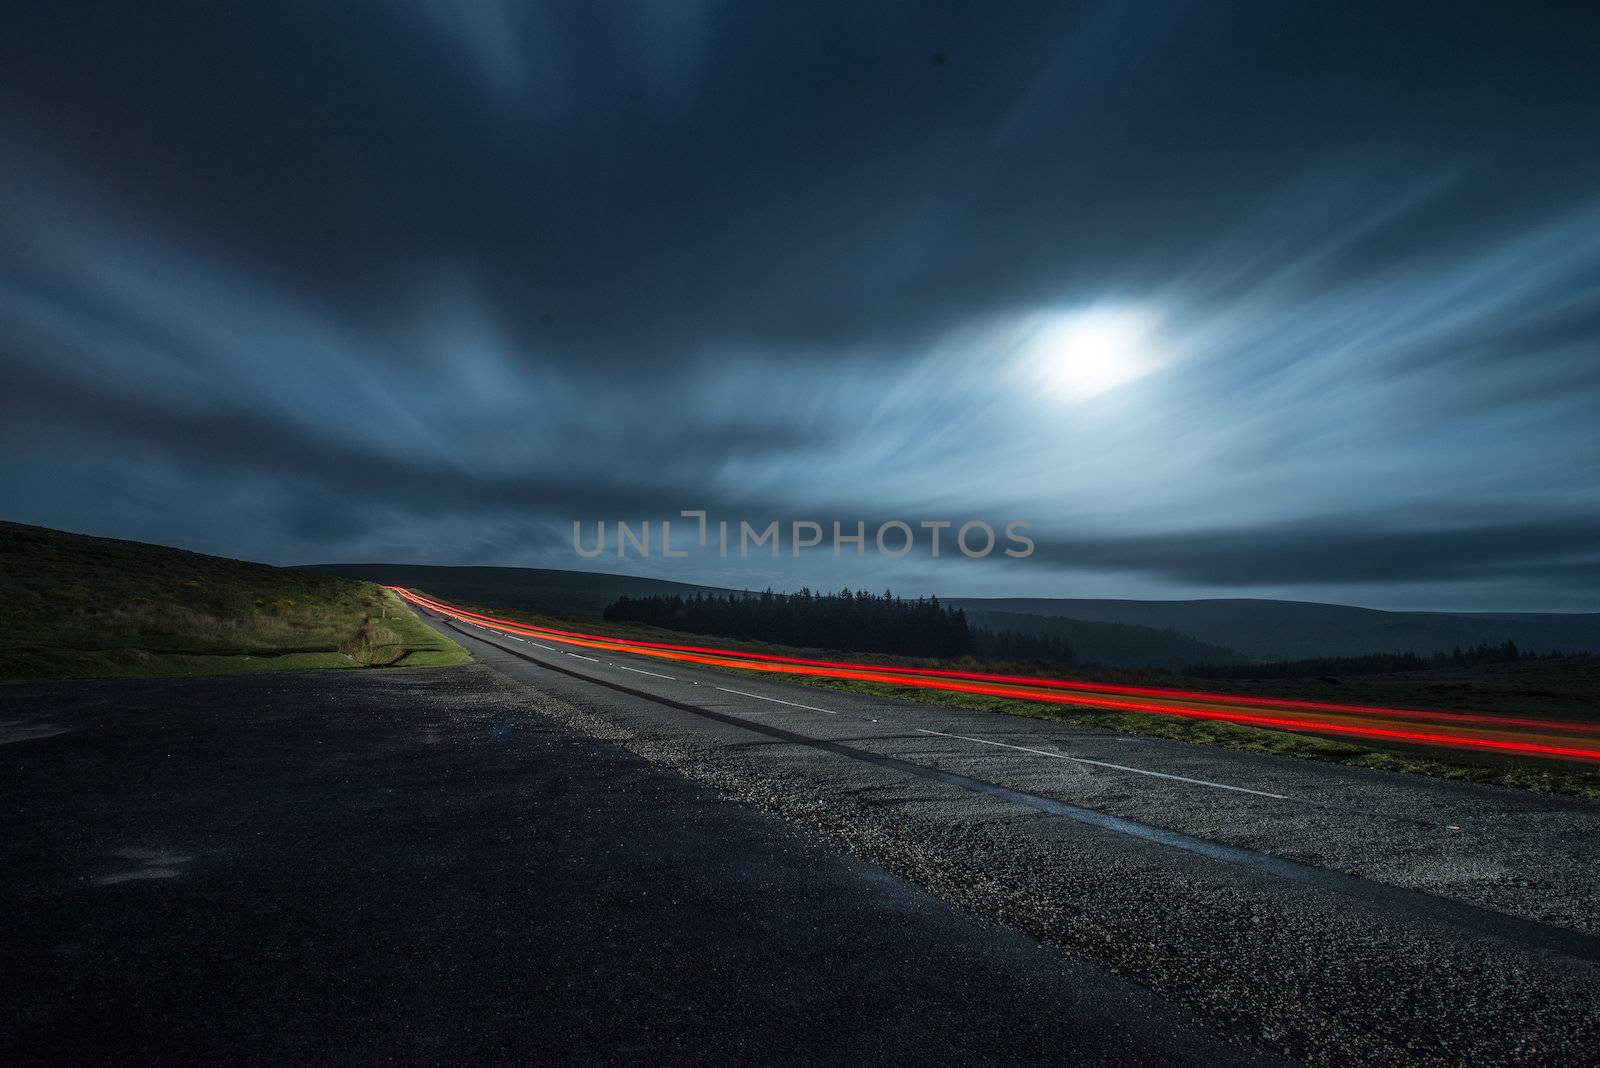 Blur light in night shoot of fast driving car with blurred clouds over full super moon and road